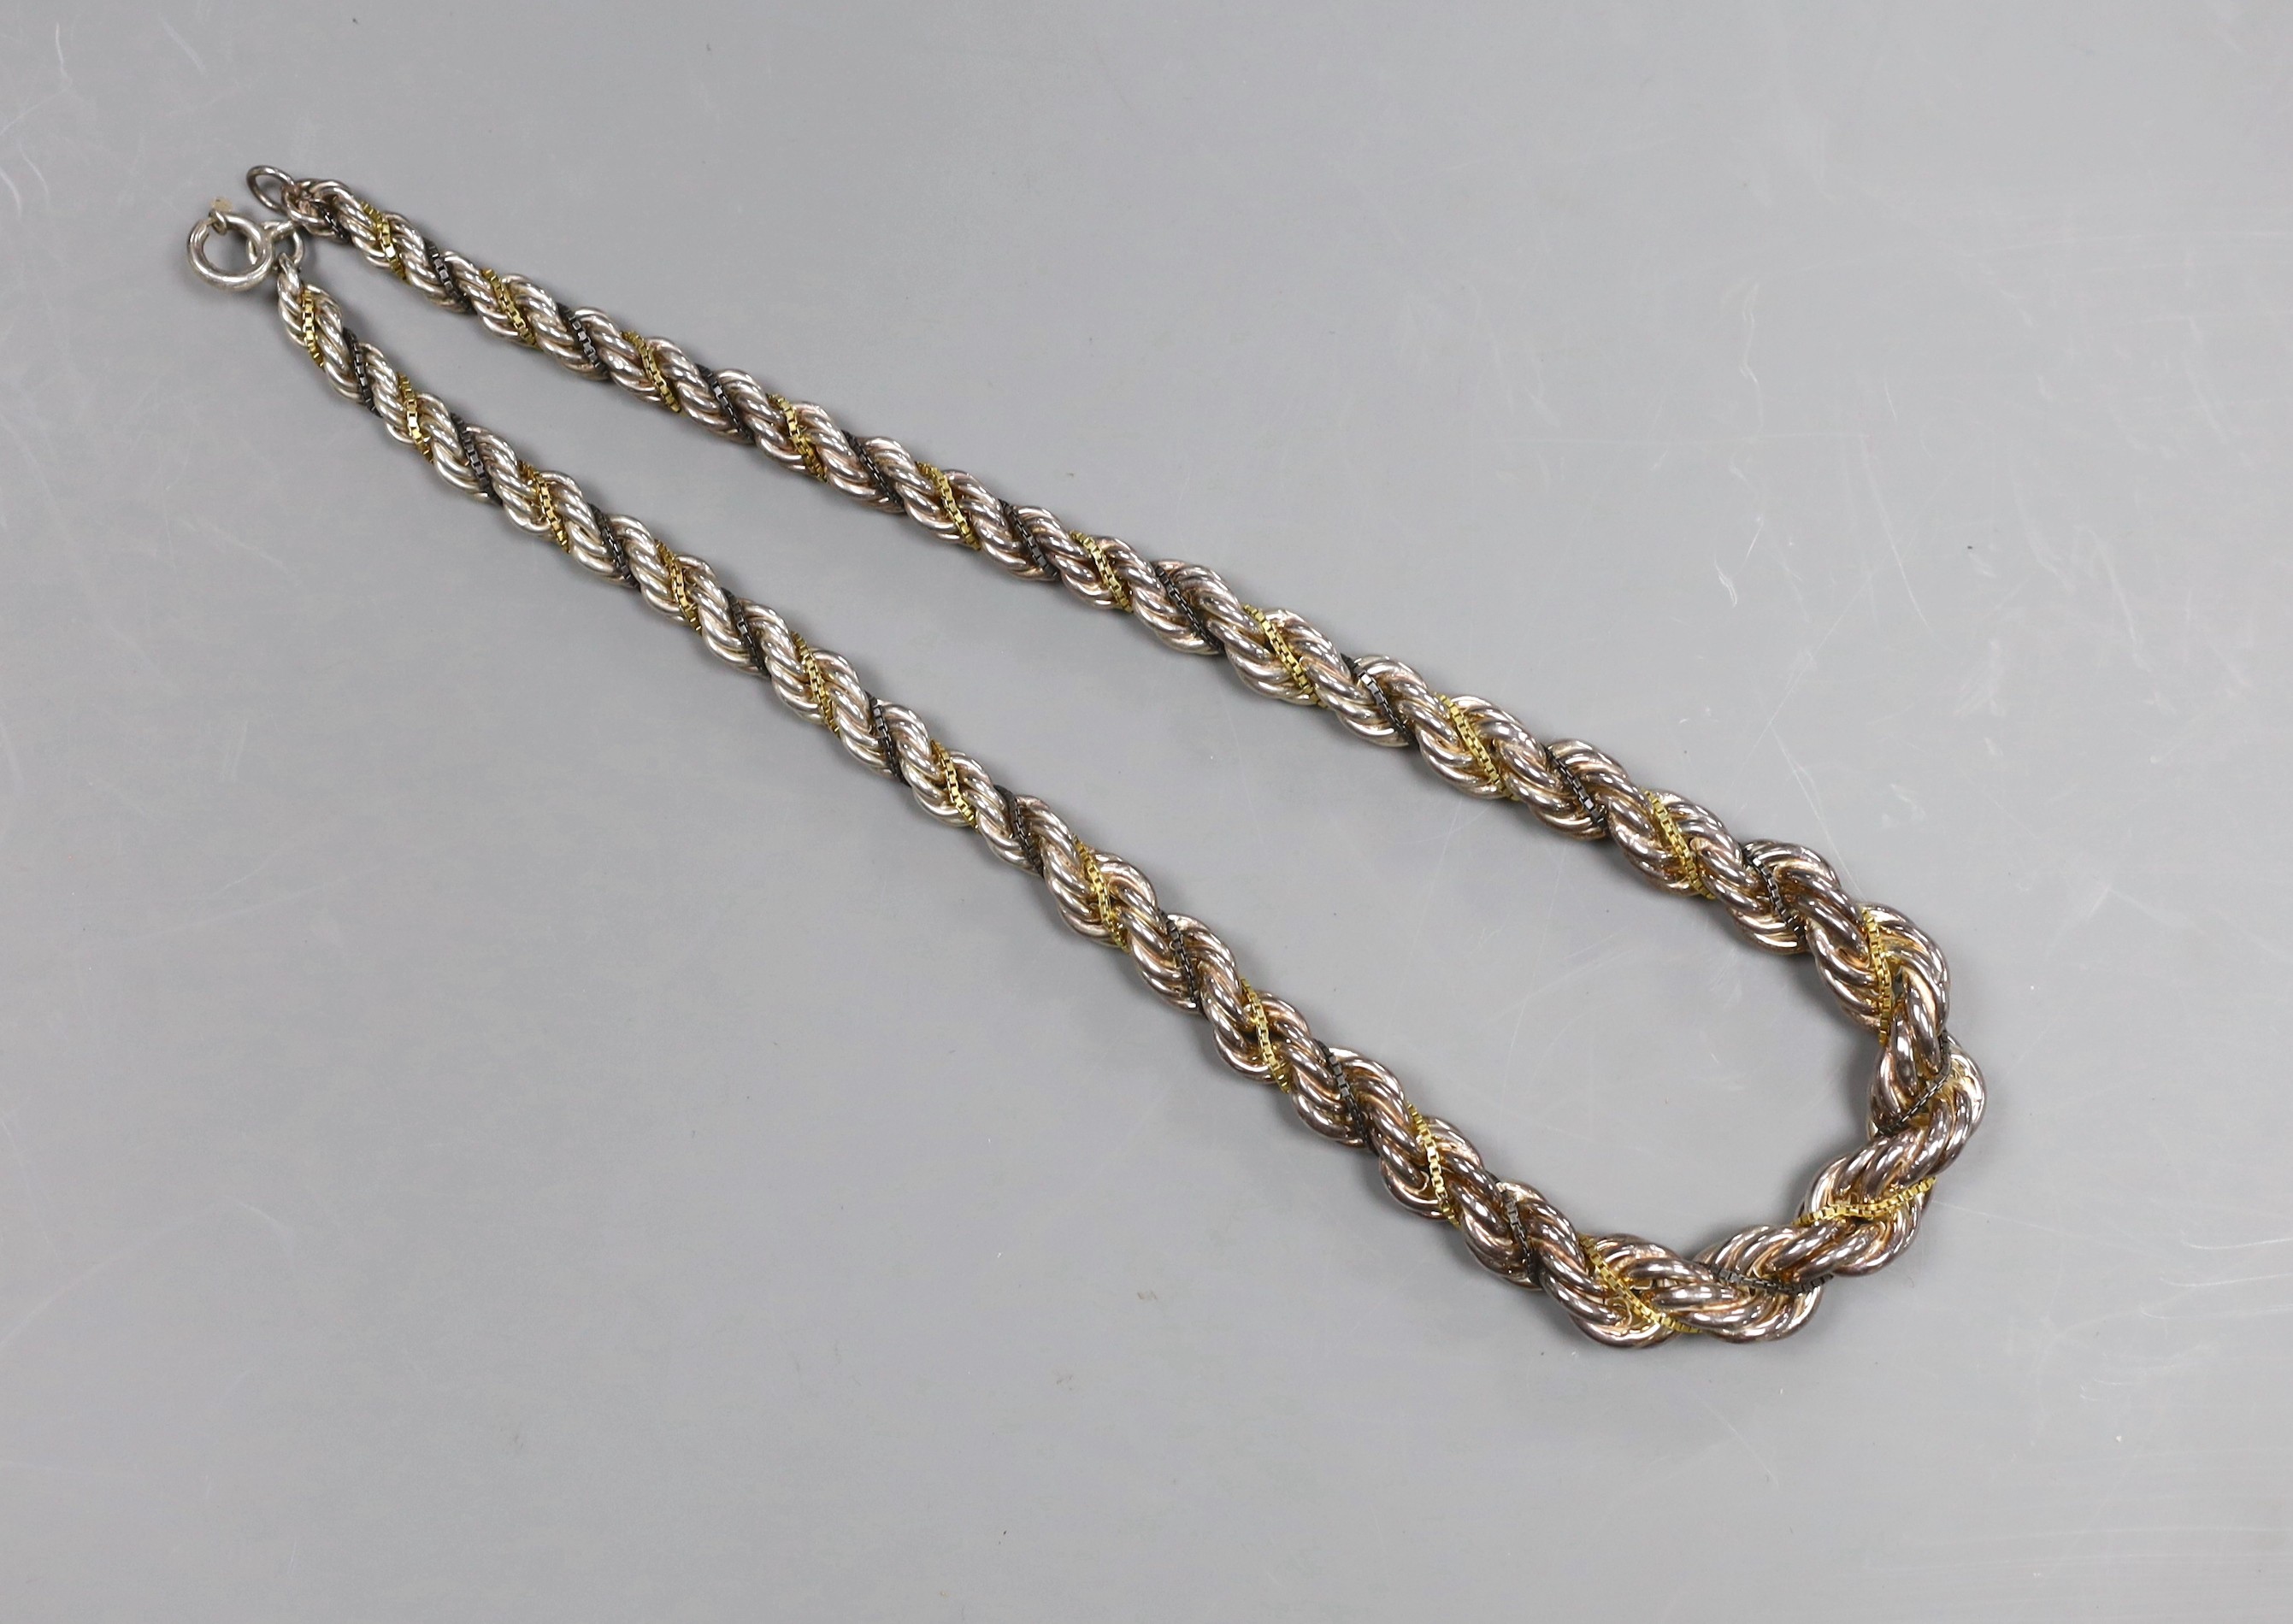 A Continental white metal, gilt and oxidised metal three strand ropetwist chain necklace, 50cm